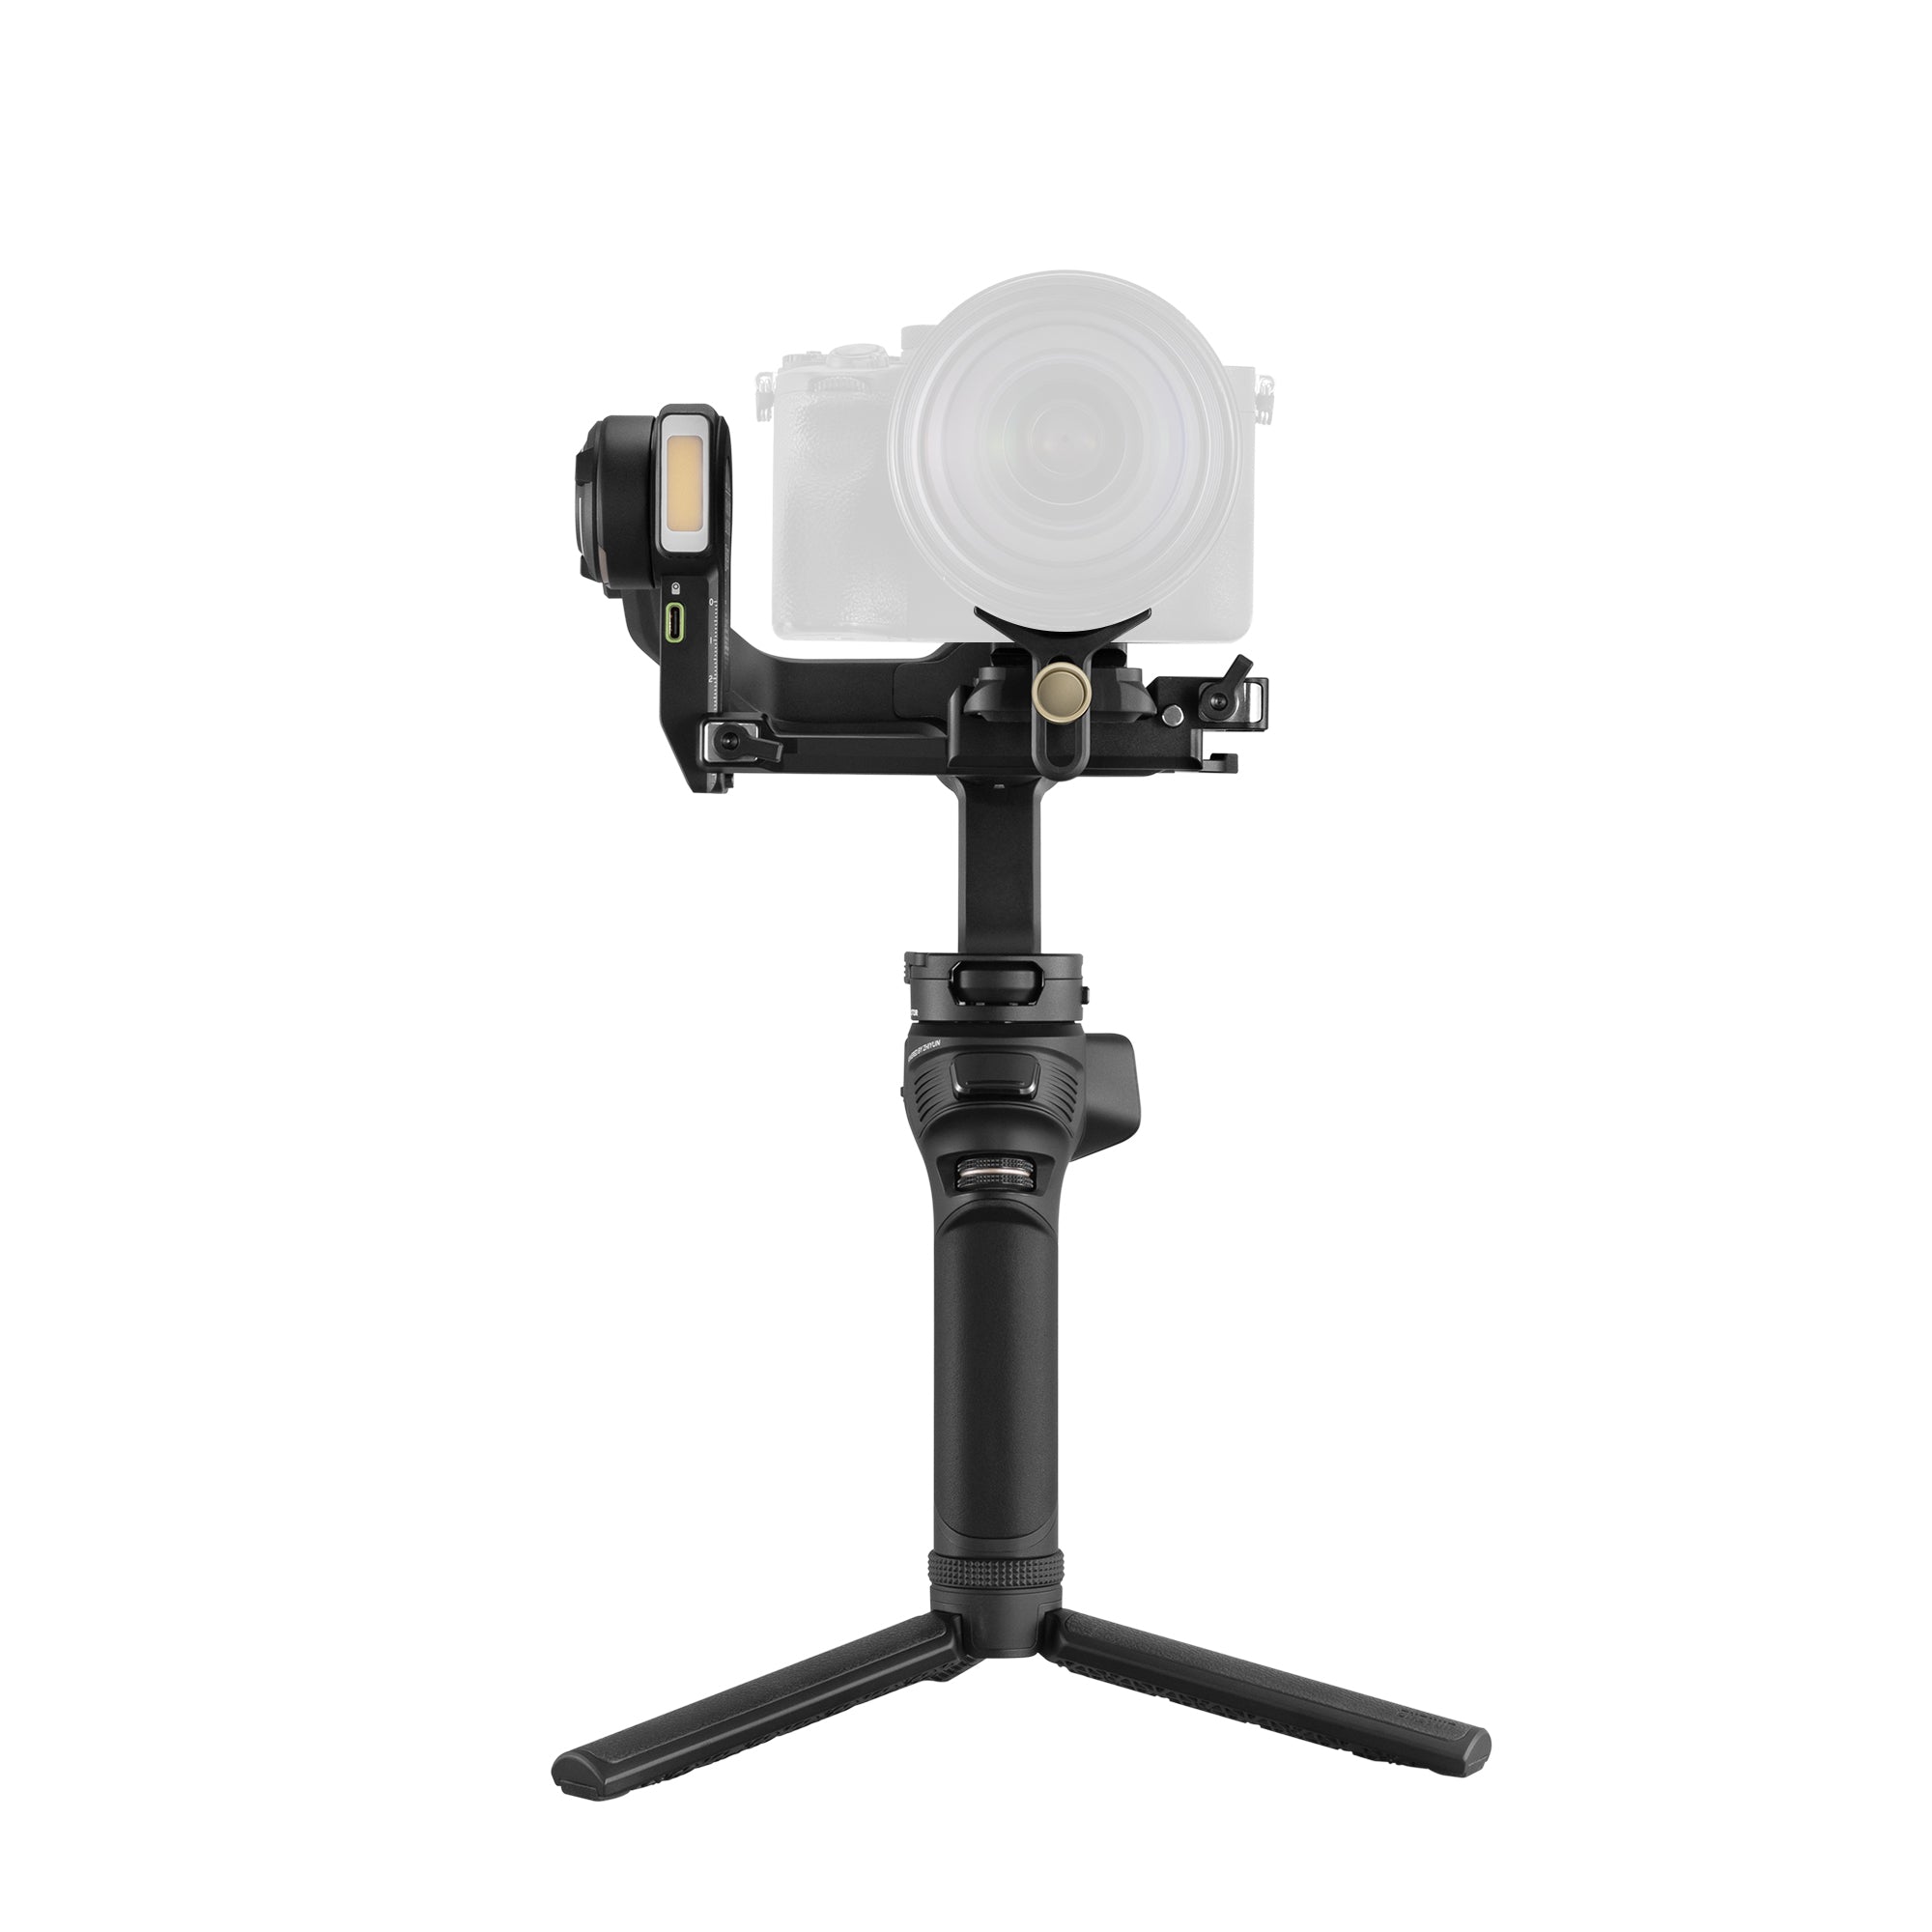 Weebill 3S - Gimbal Stabilizer for DSLR and Mirrorless Camera 